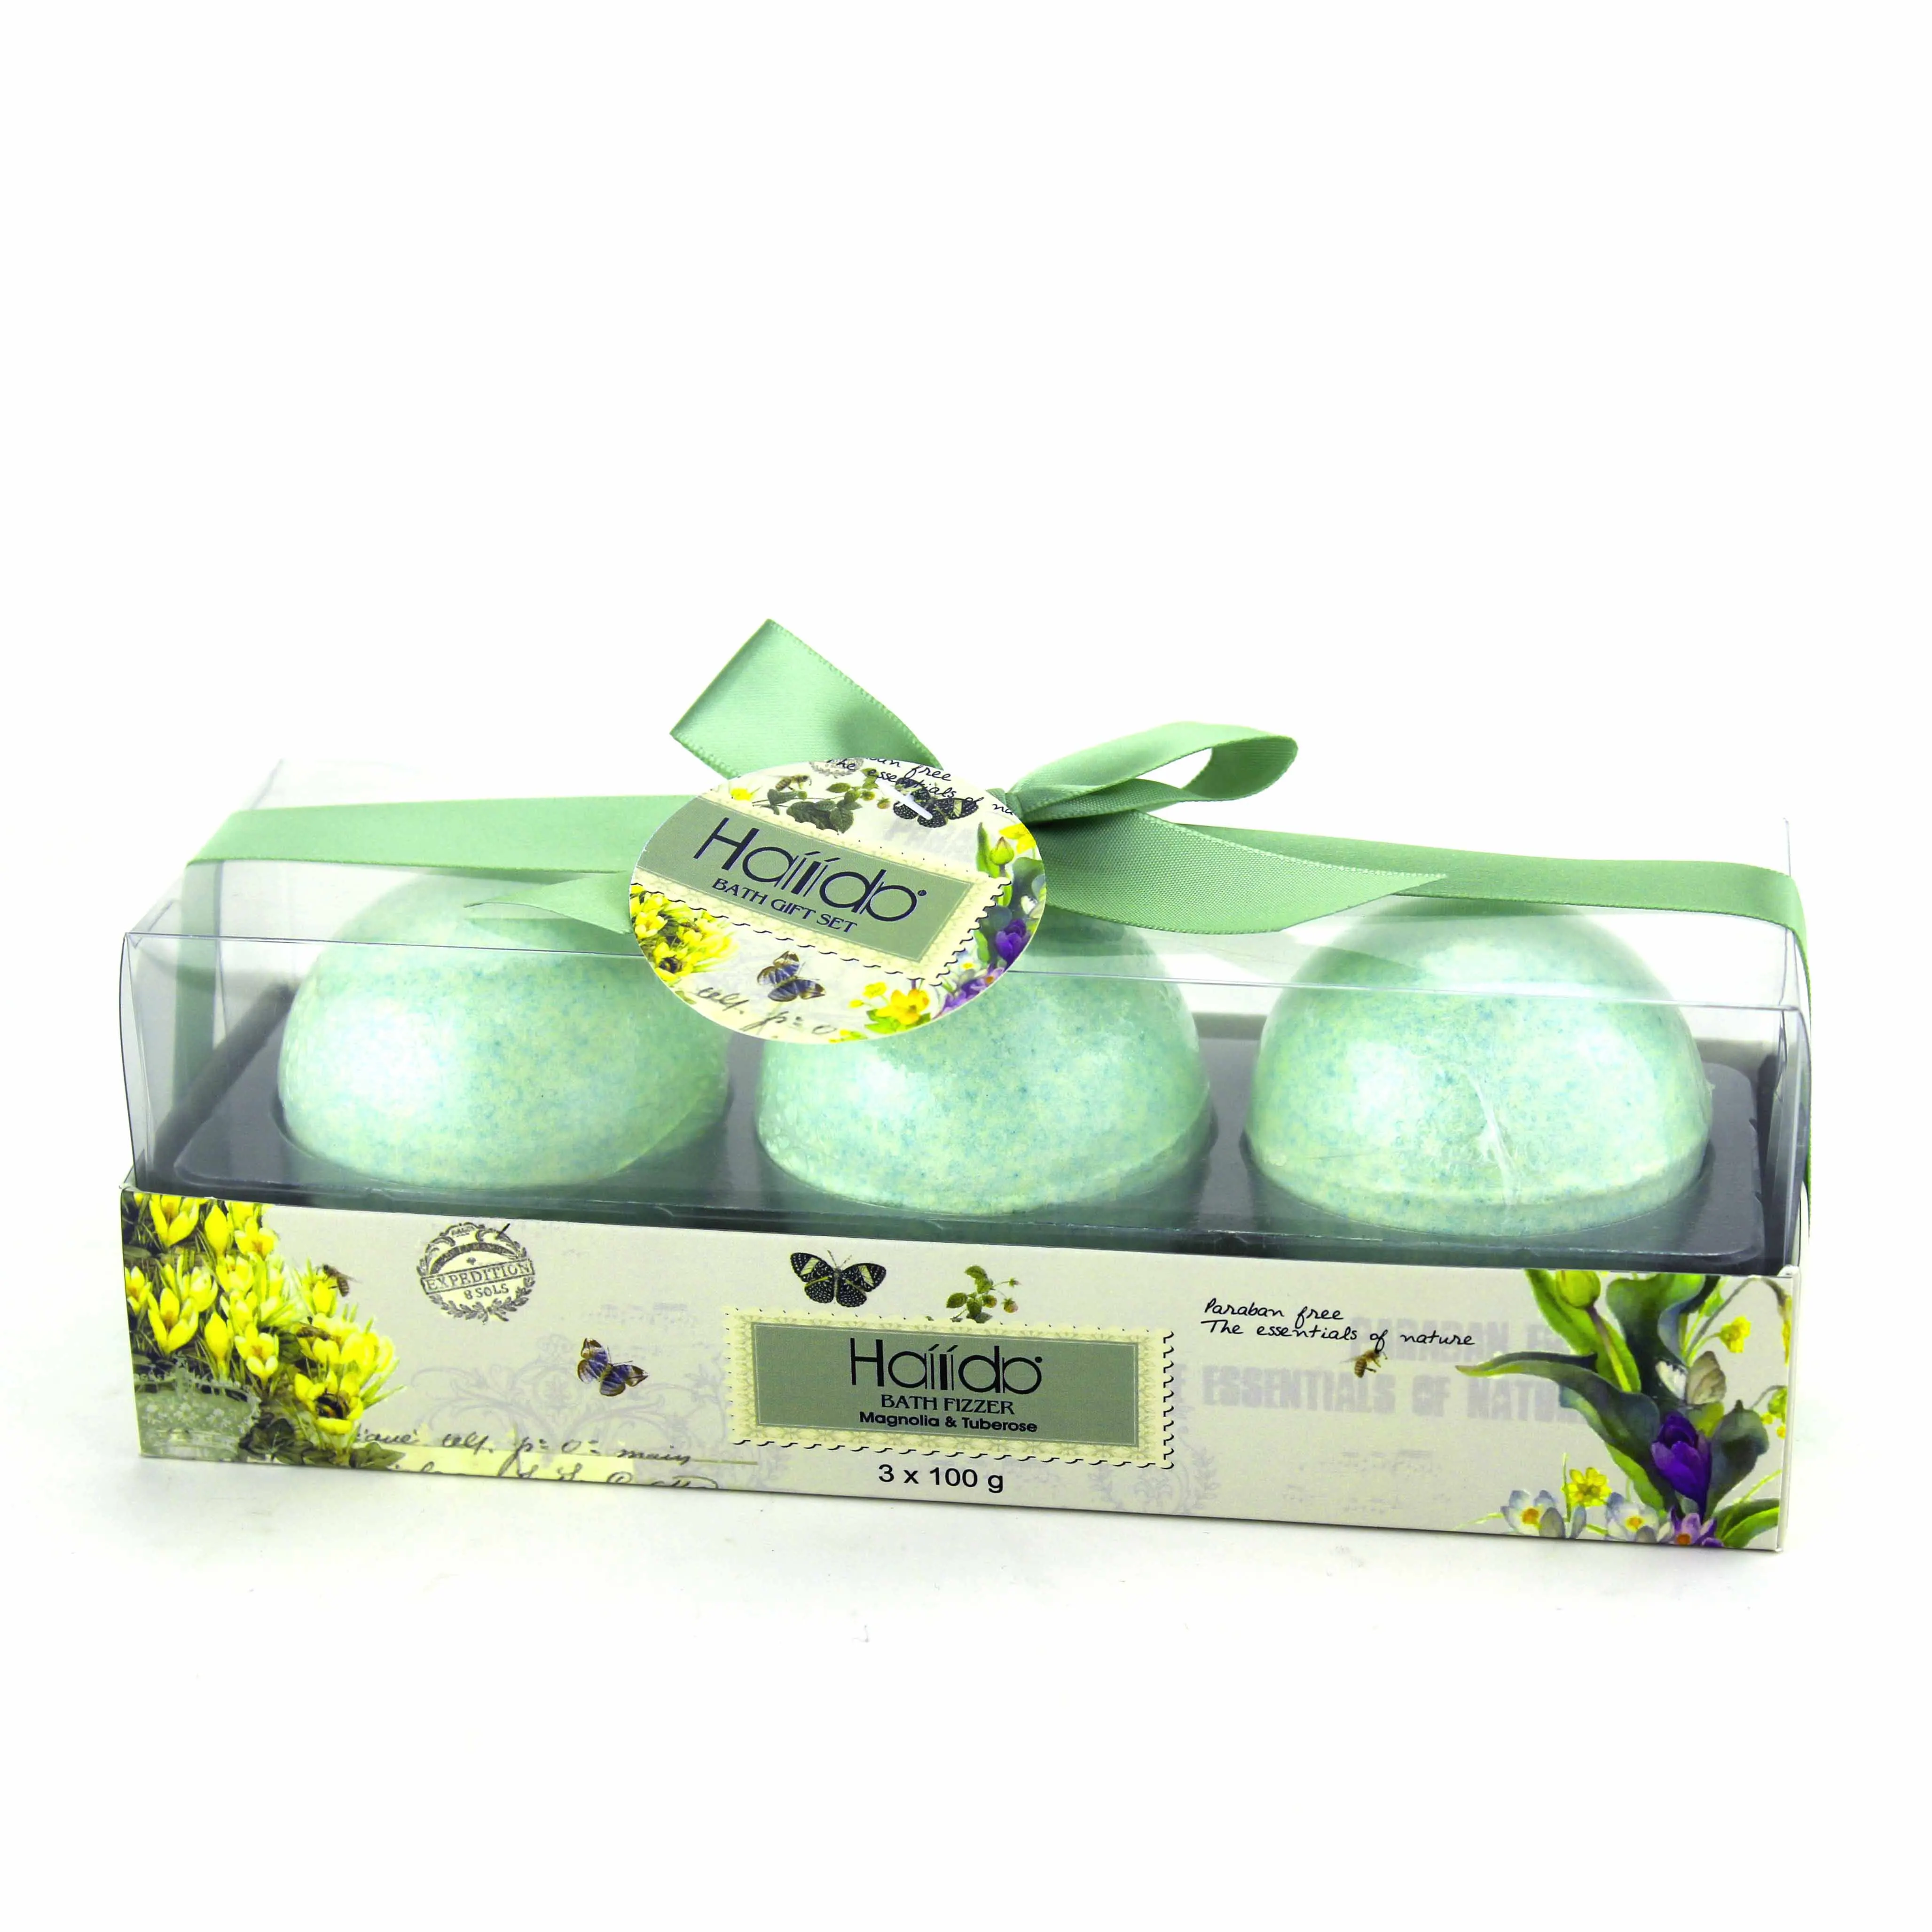 
Daily need products bath bomb gift set  (60355138707)